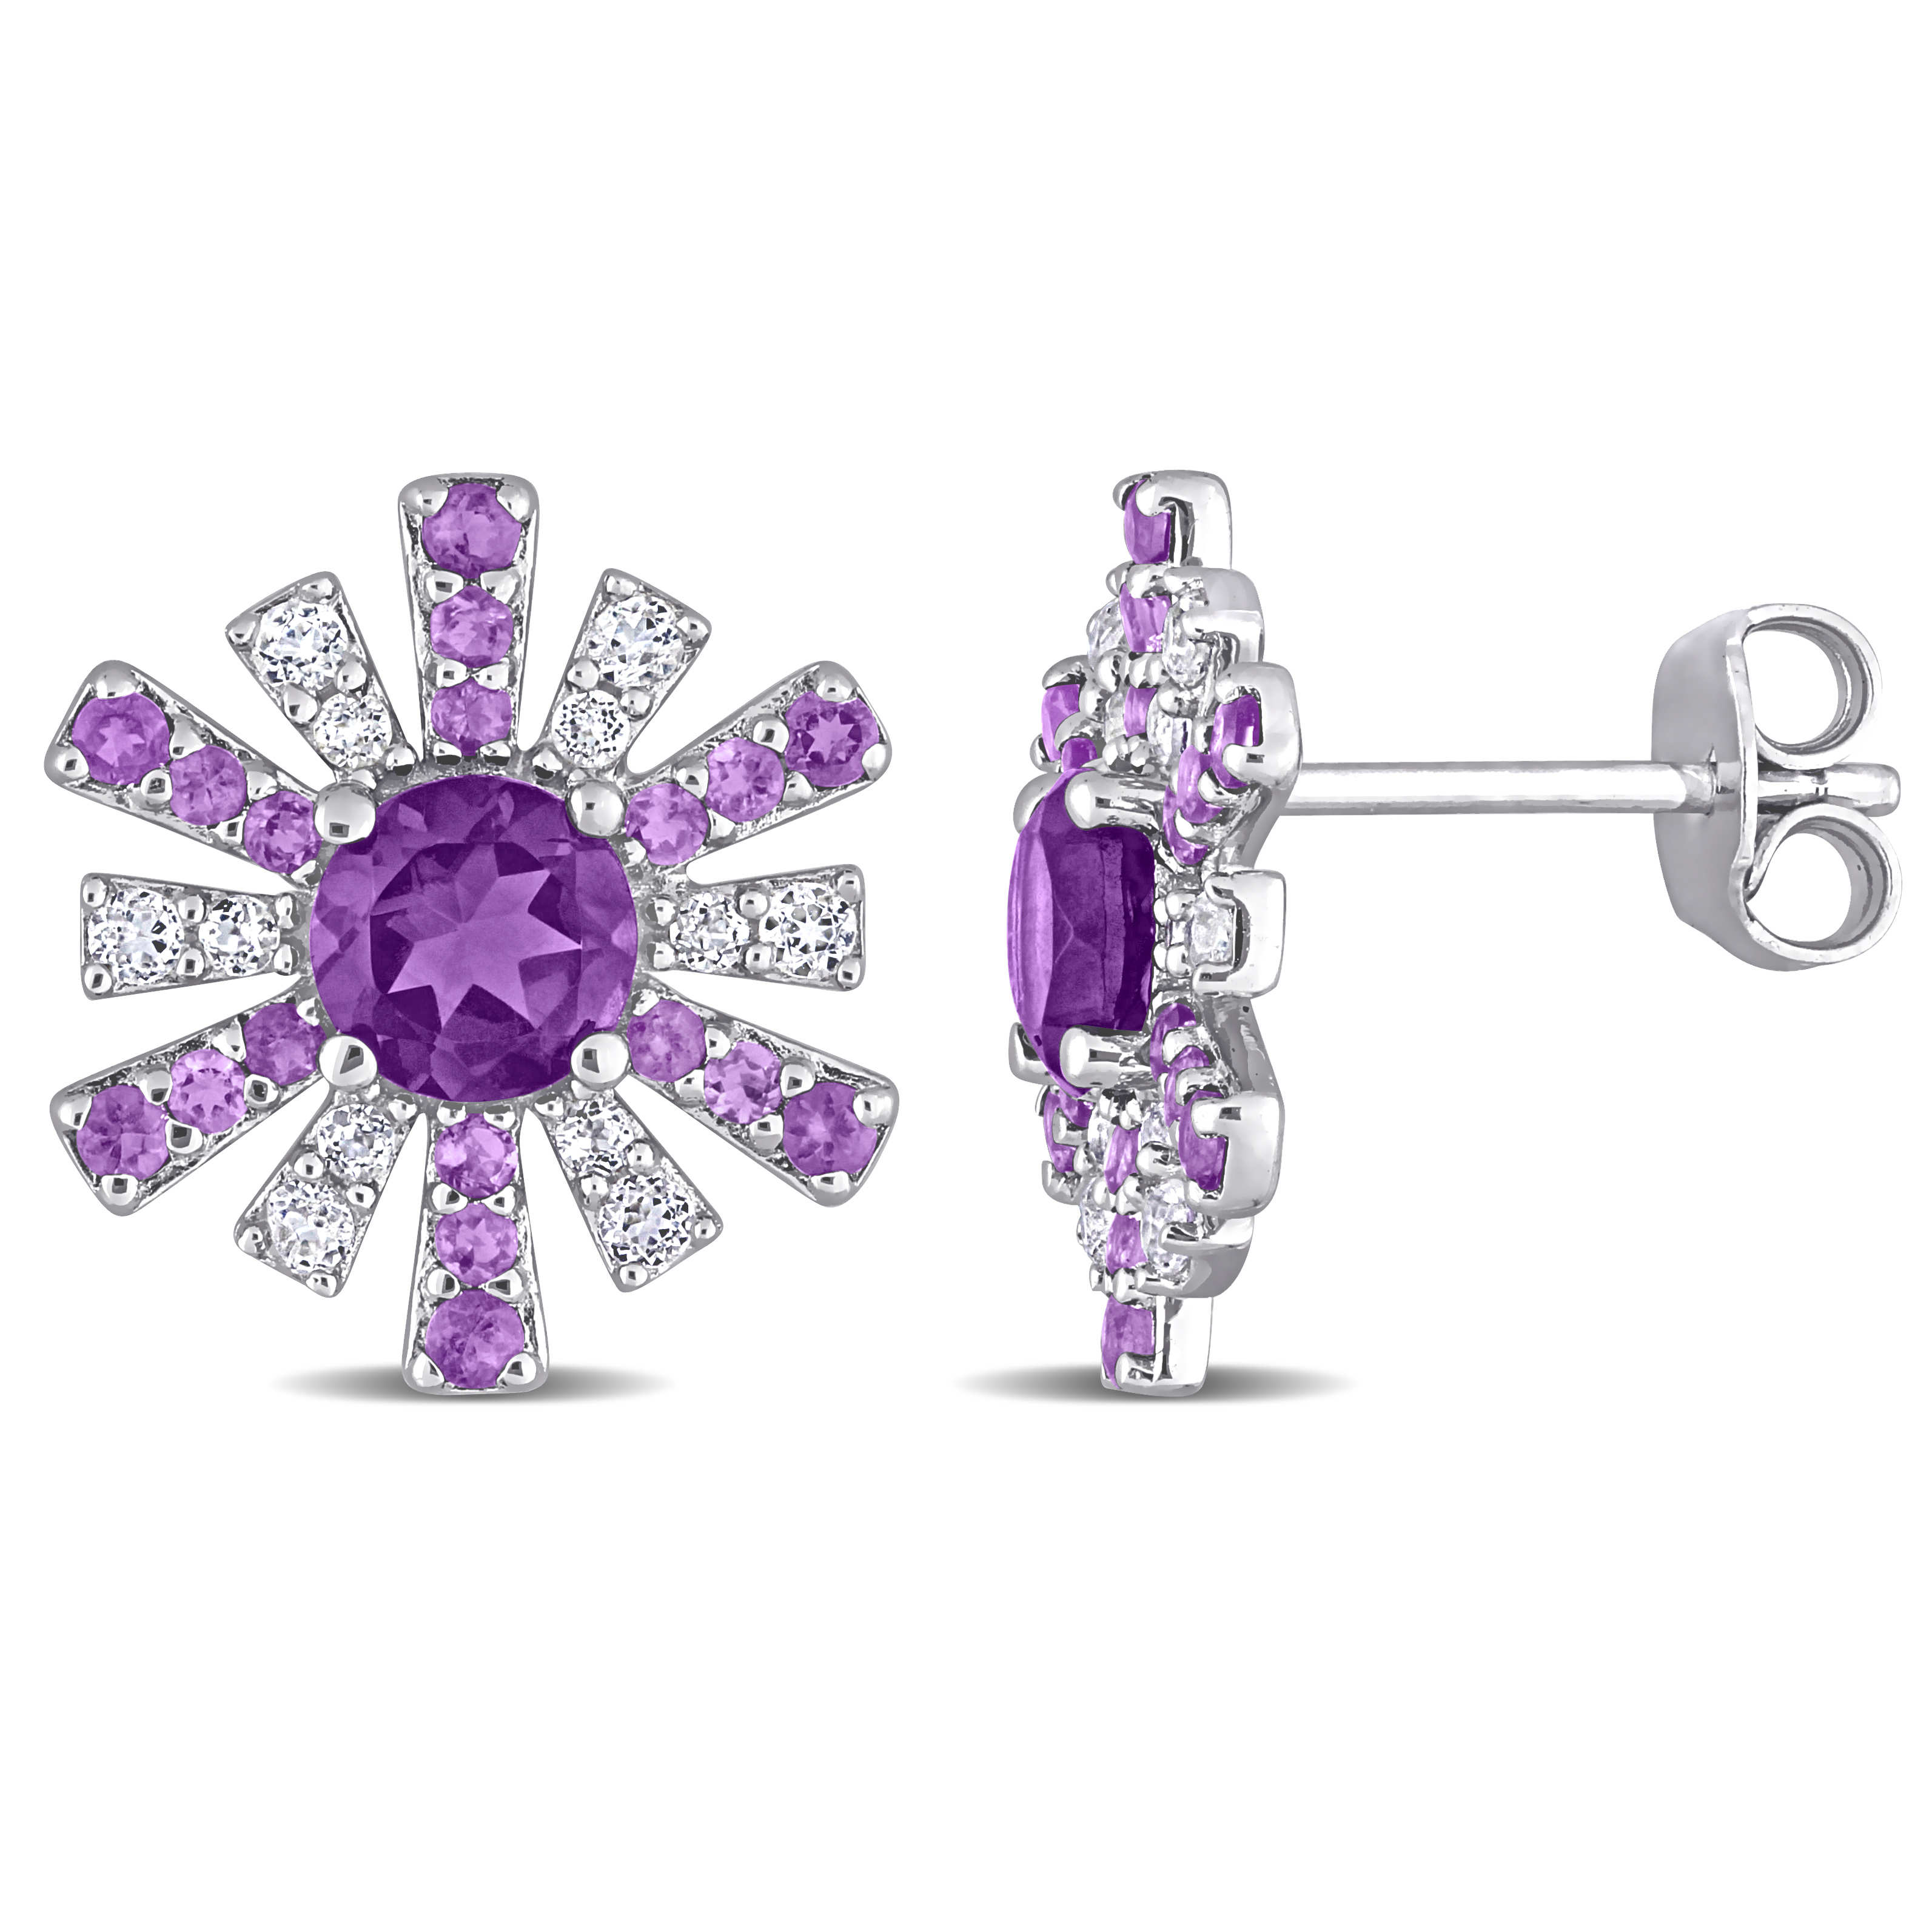 1 3/4 CT TGW African Amethyst and White Topaz Starburst Earrings in Sterling Silver